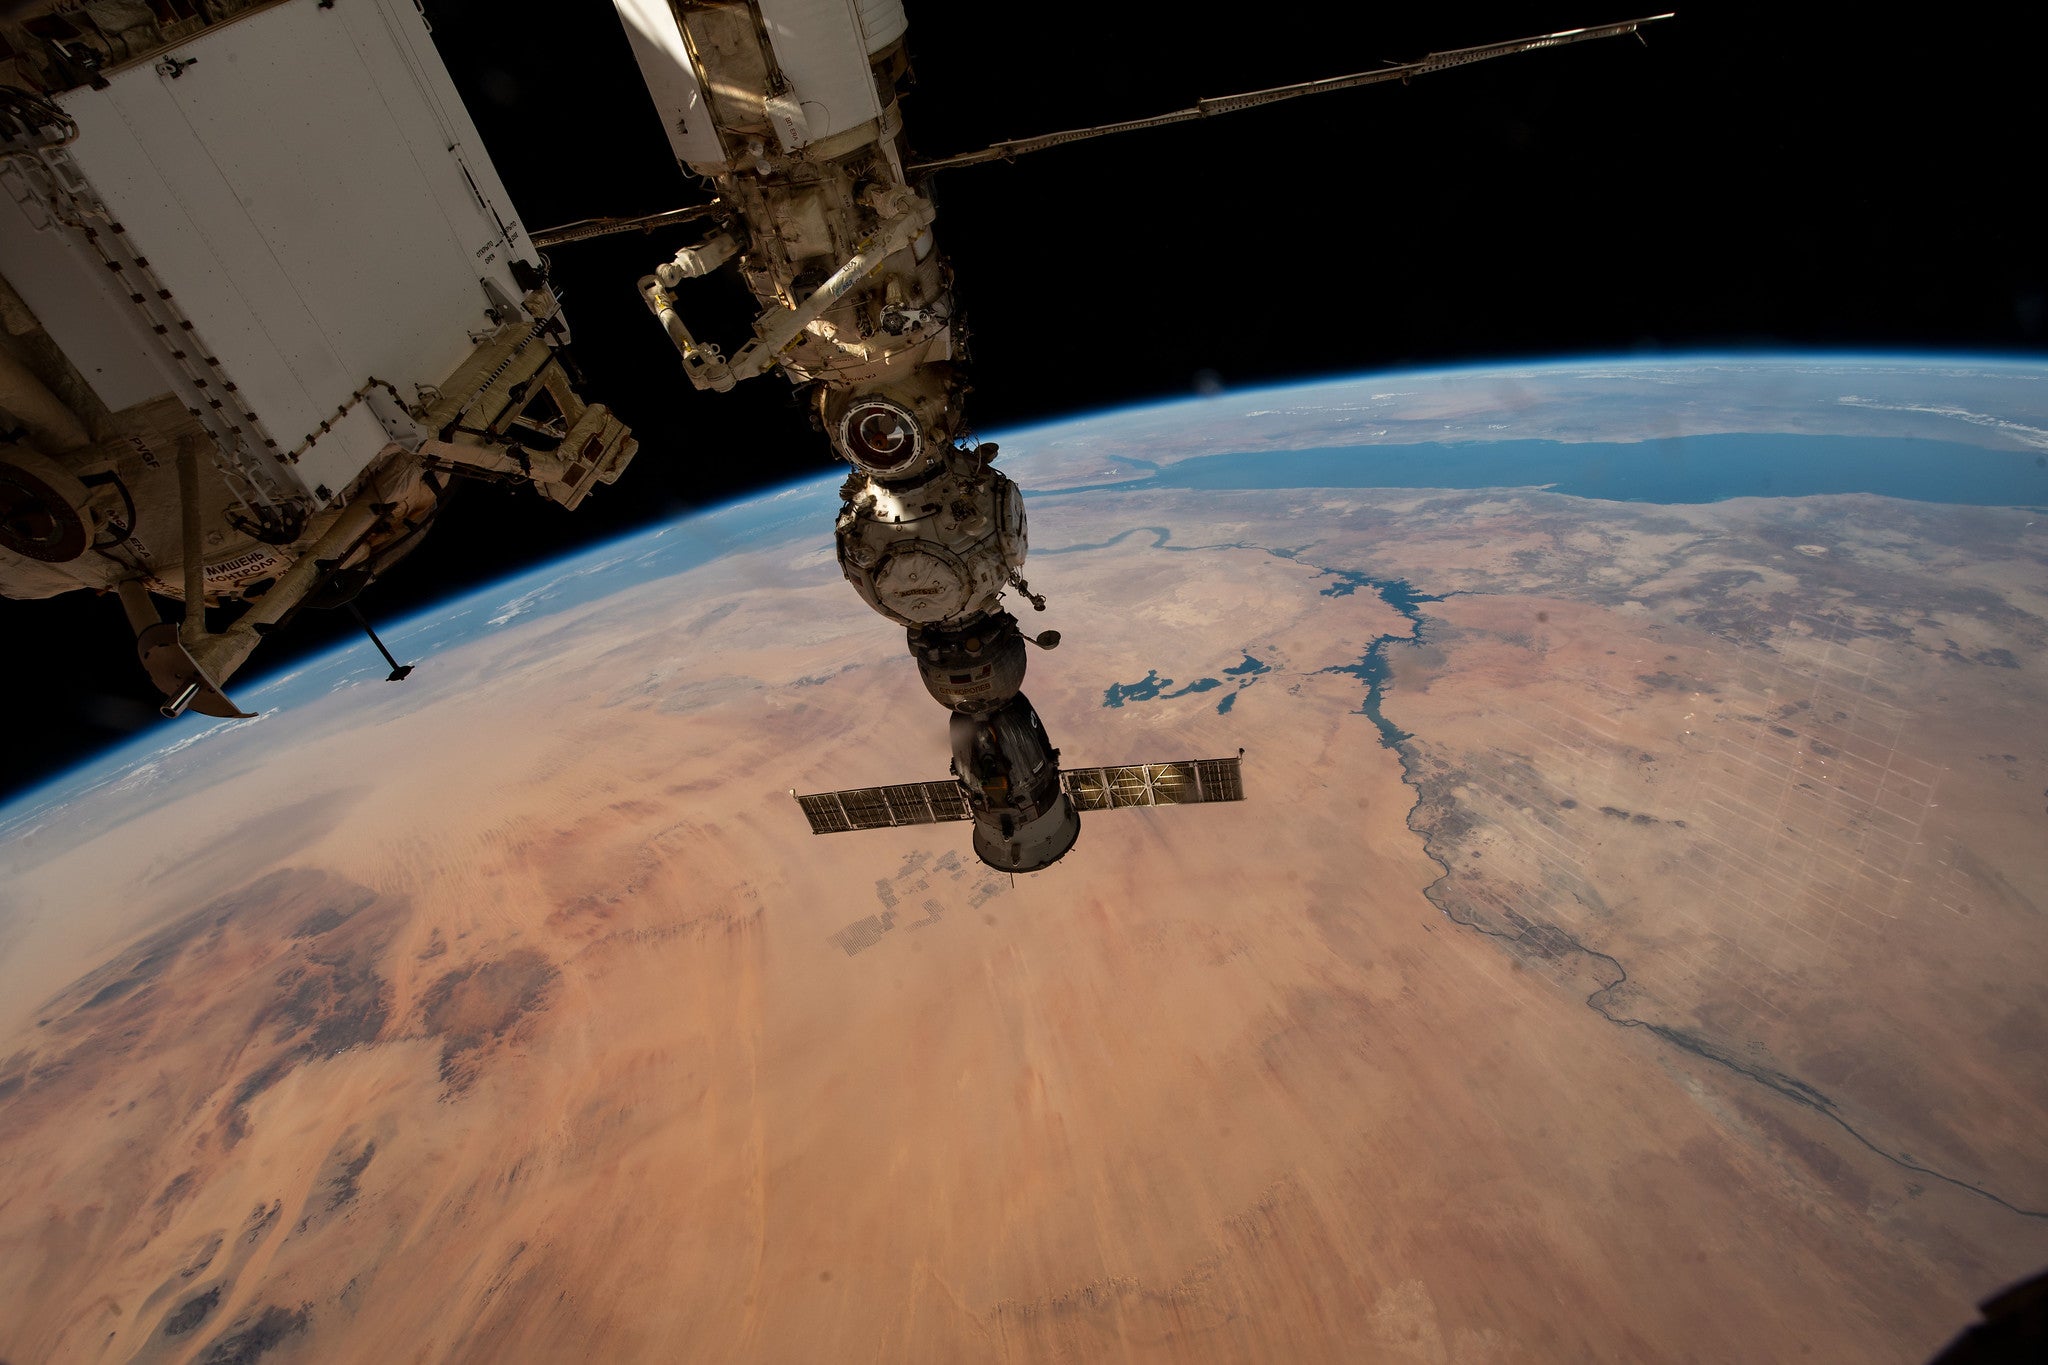 The view of northwest Sudan from the International Space Station, which operates in low Earth orbit. (Photo: NASA)